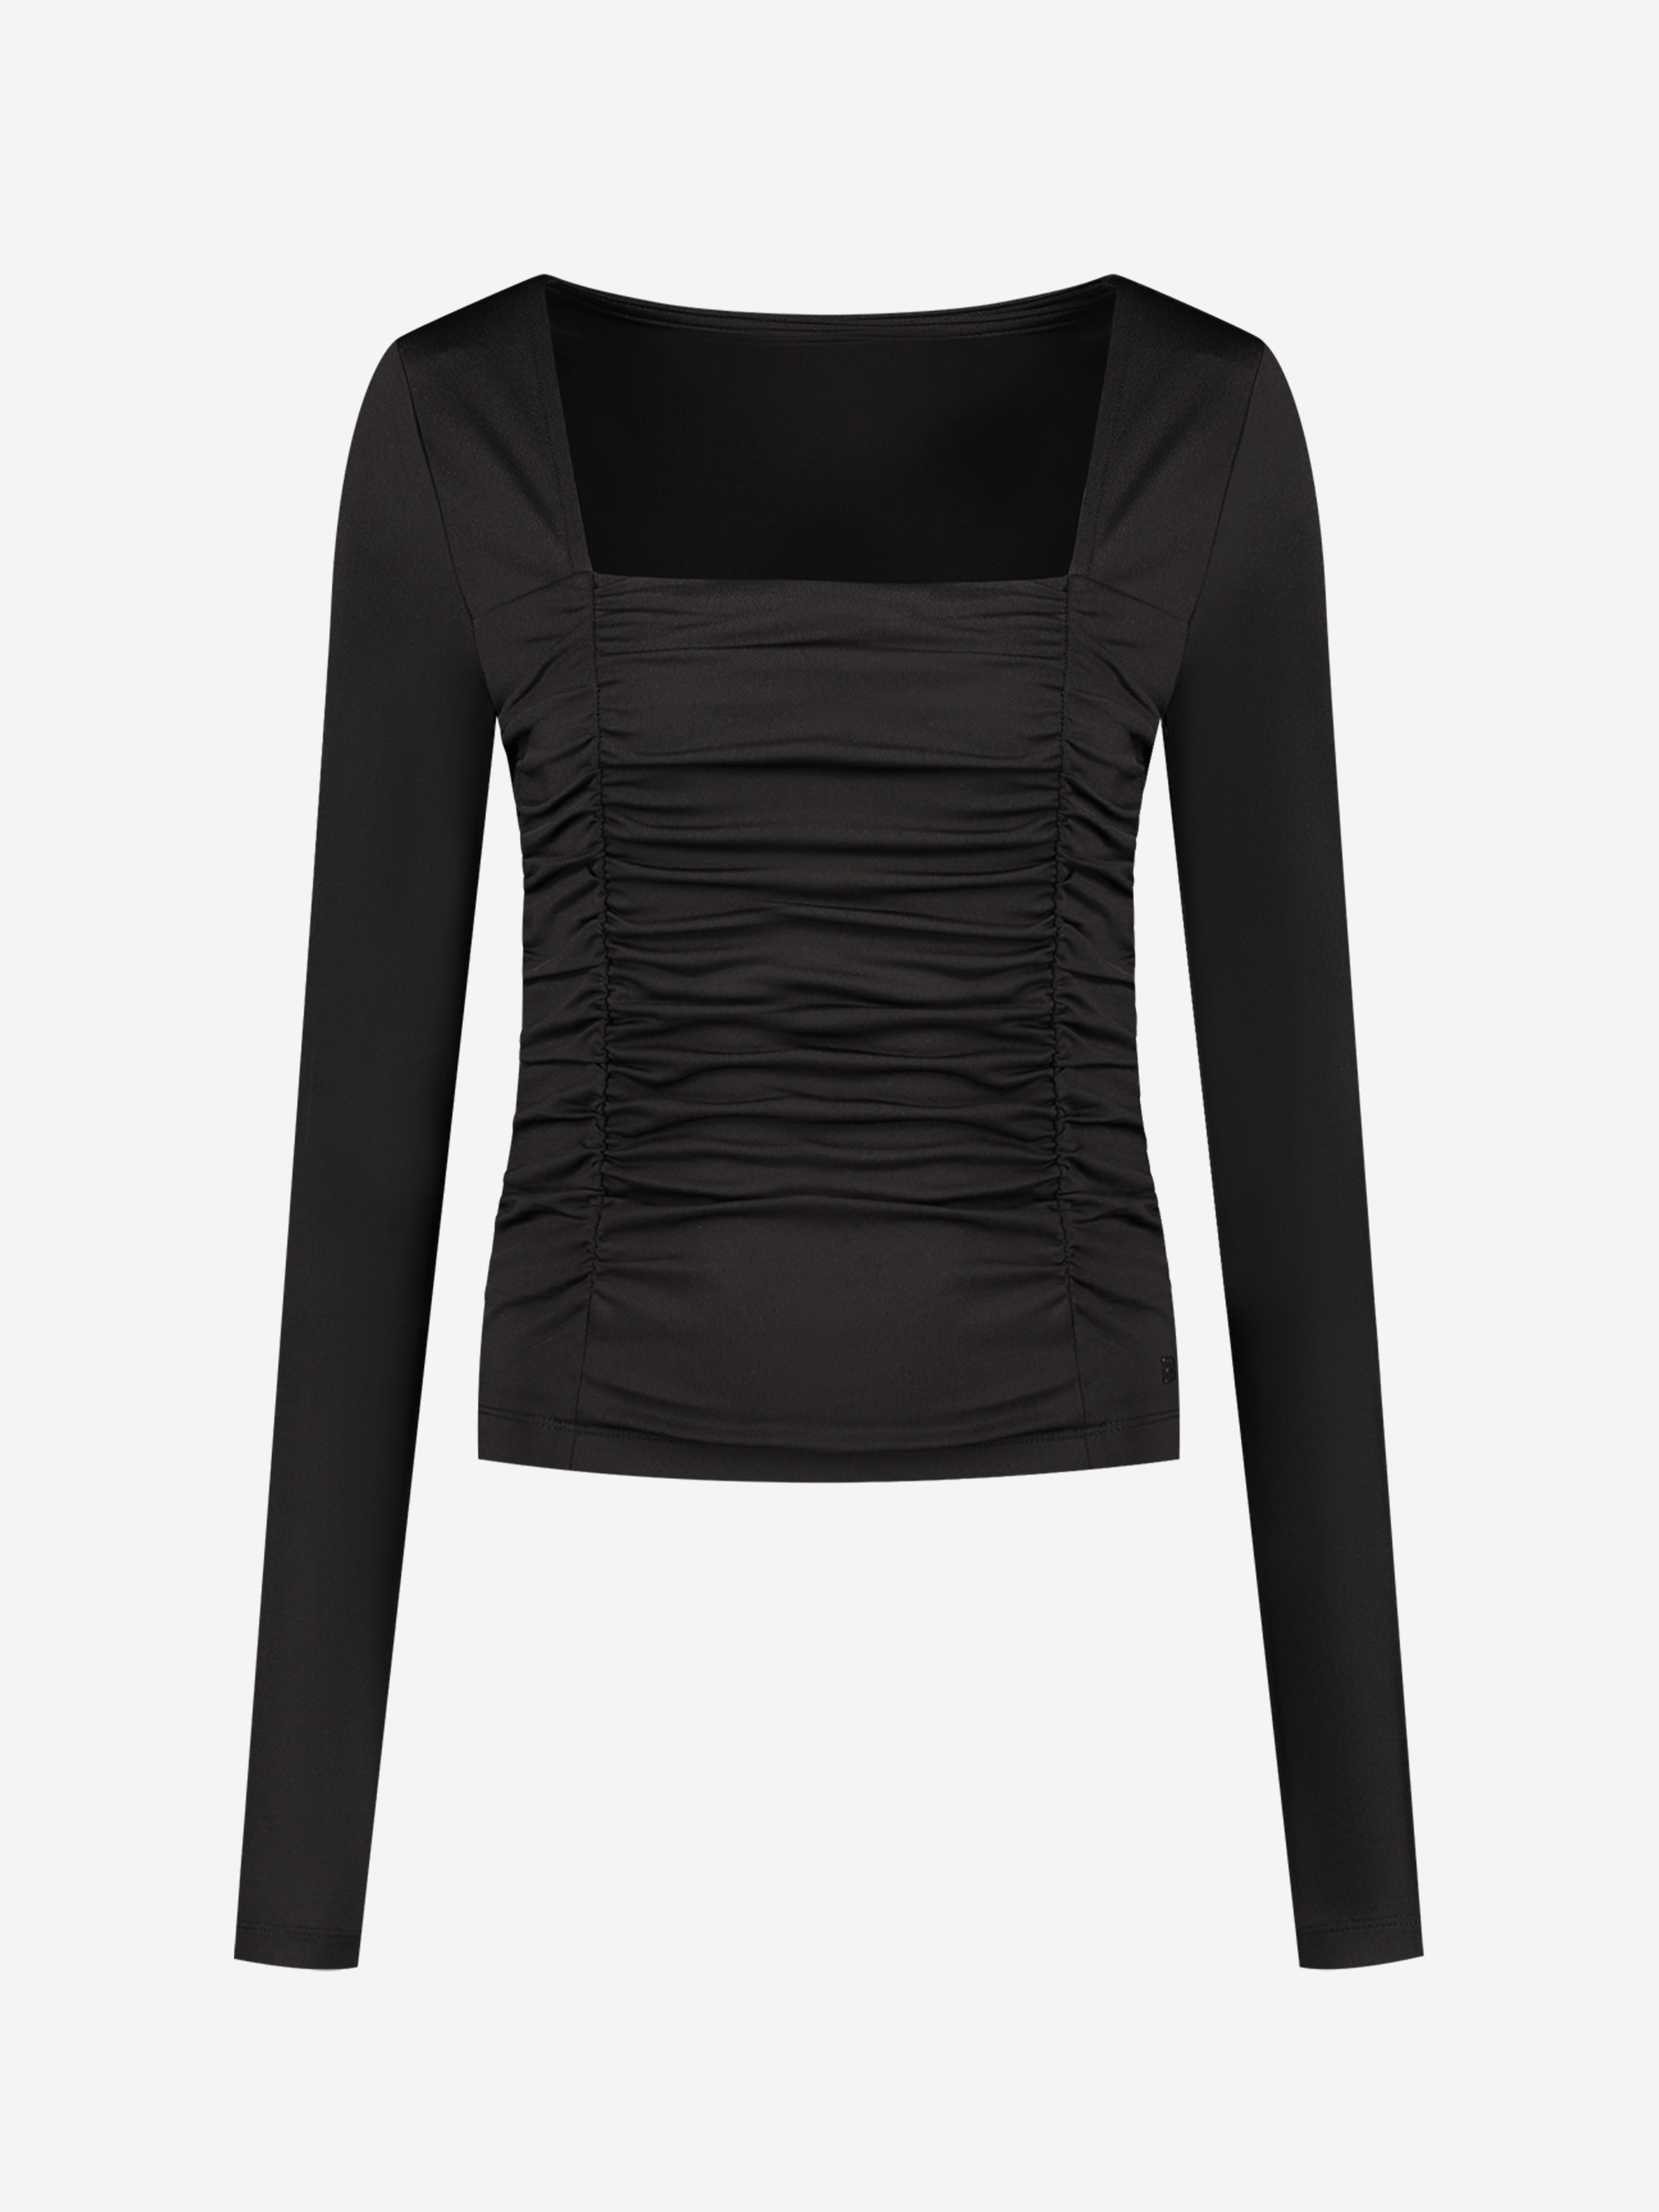 Fitted top with square neckline